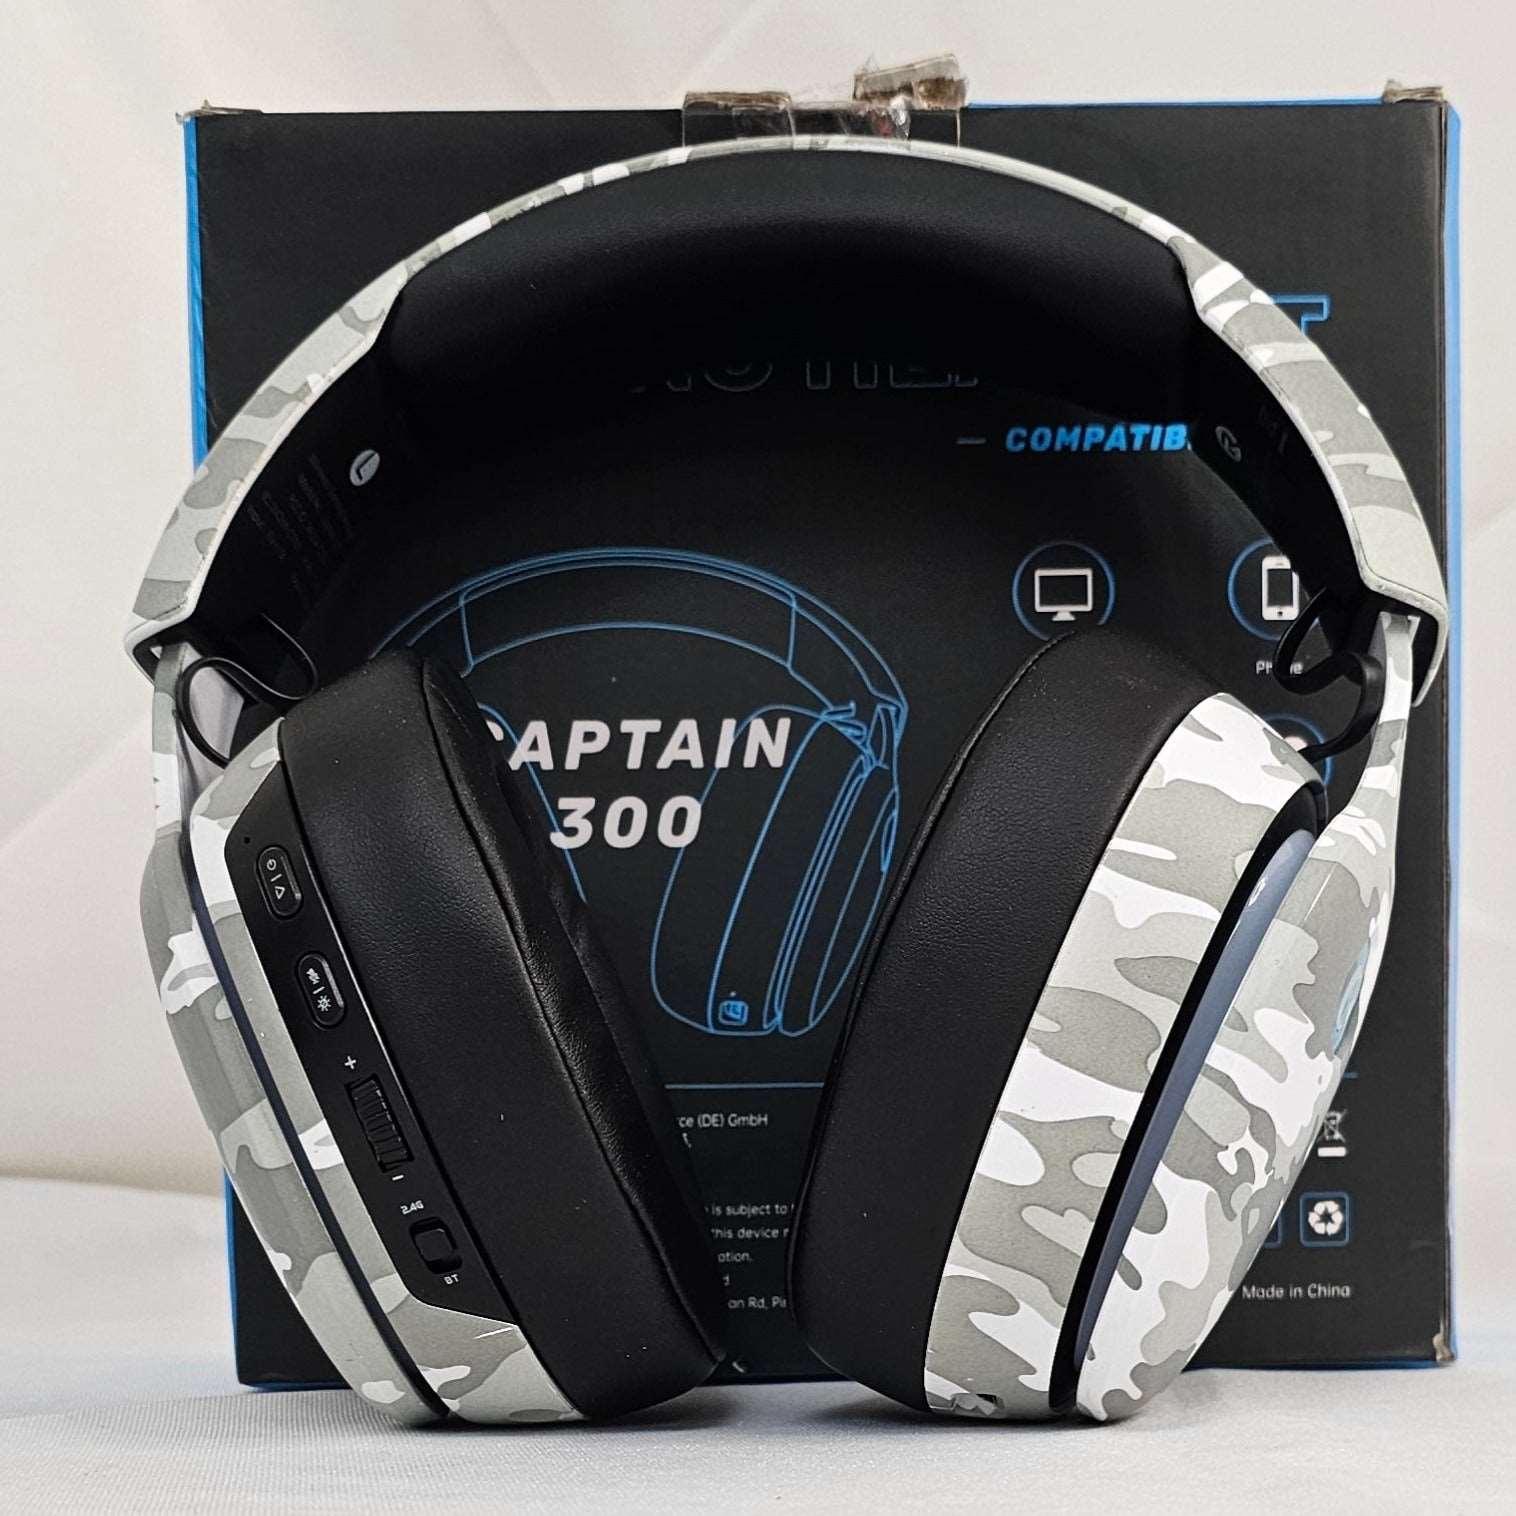 Gaming Headset Gtheos Captain 300 - DQ Distribution